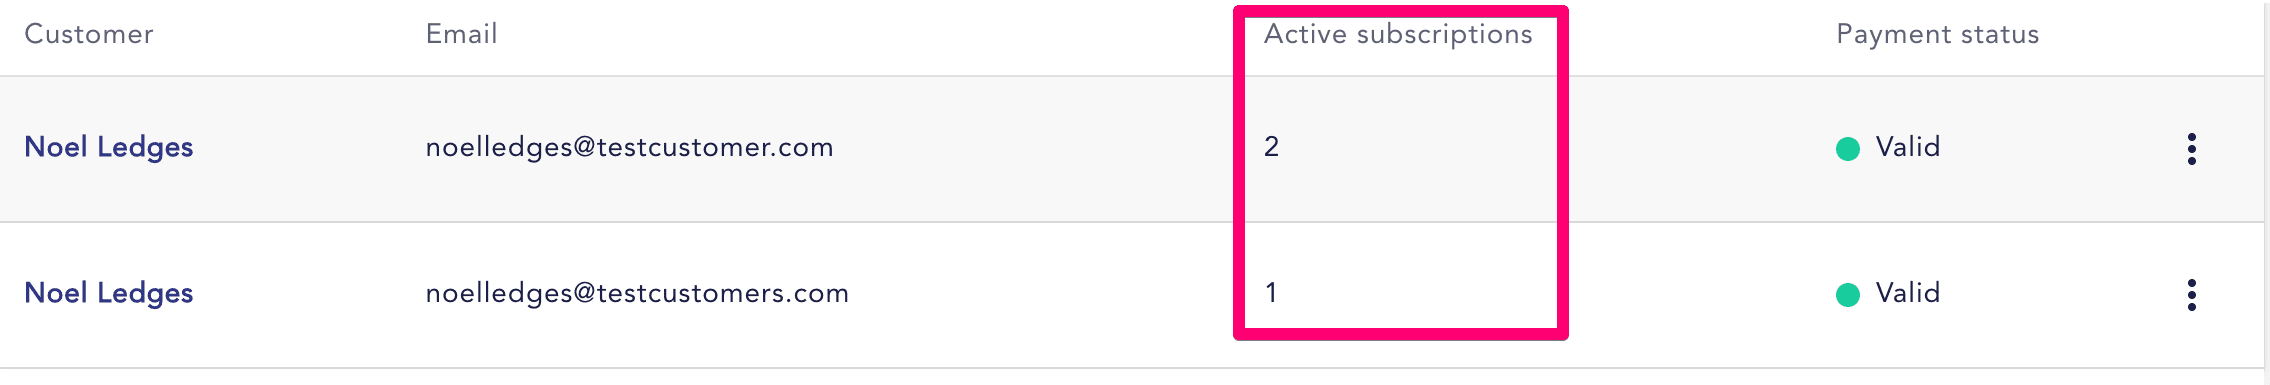 Active subscriptions on the Customers page